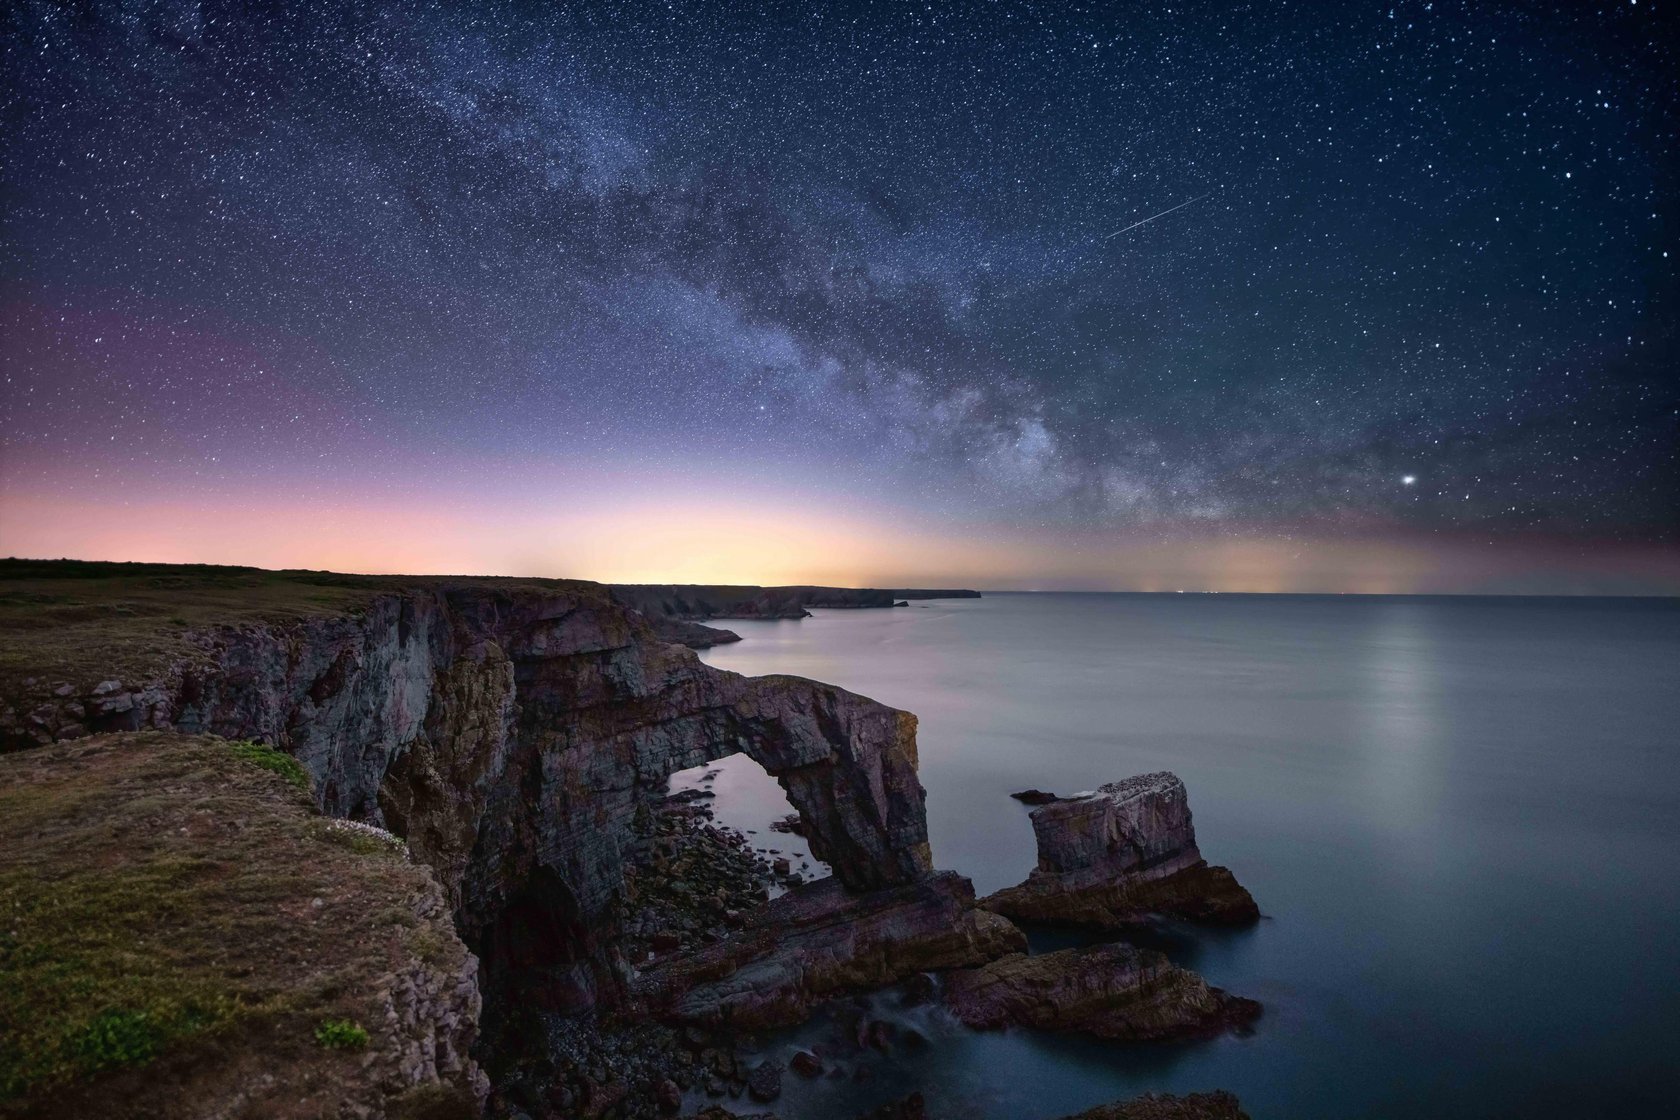 Landscape Astrophotography Editing Tips with Luminar Image22